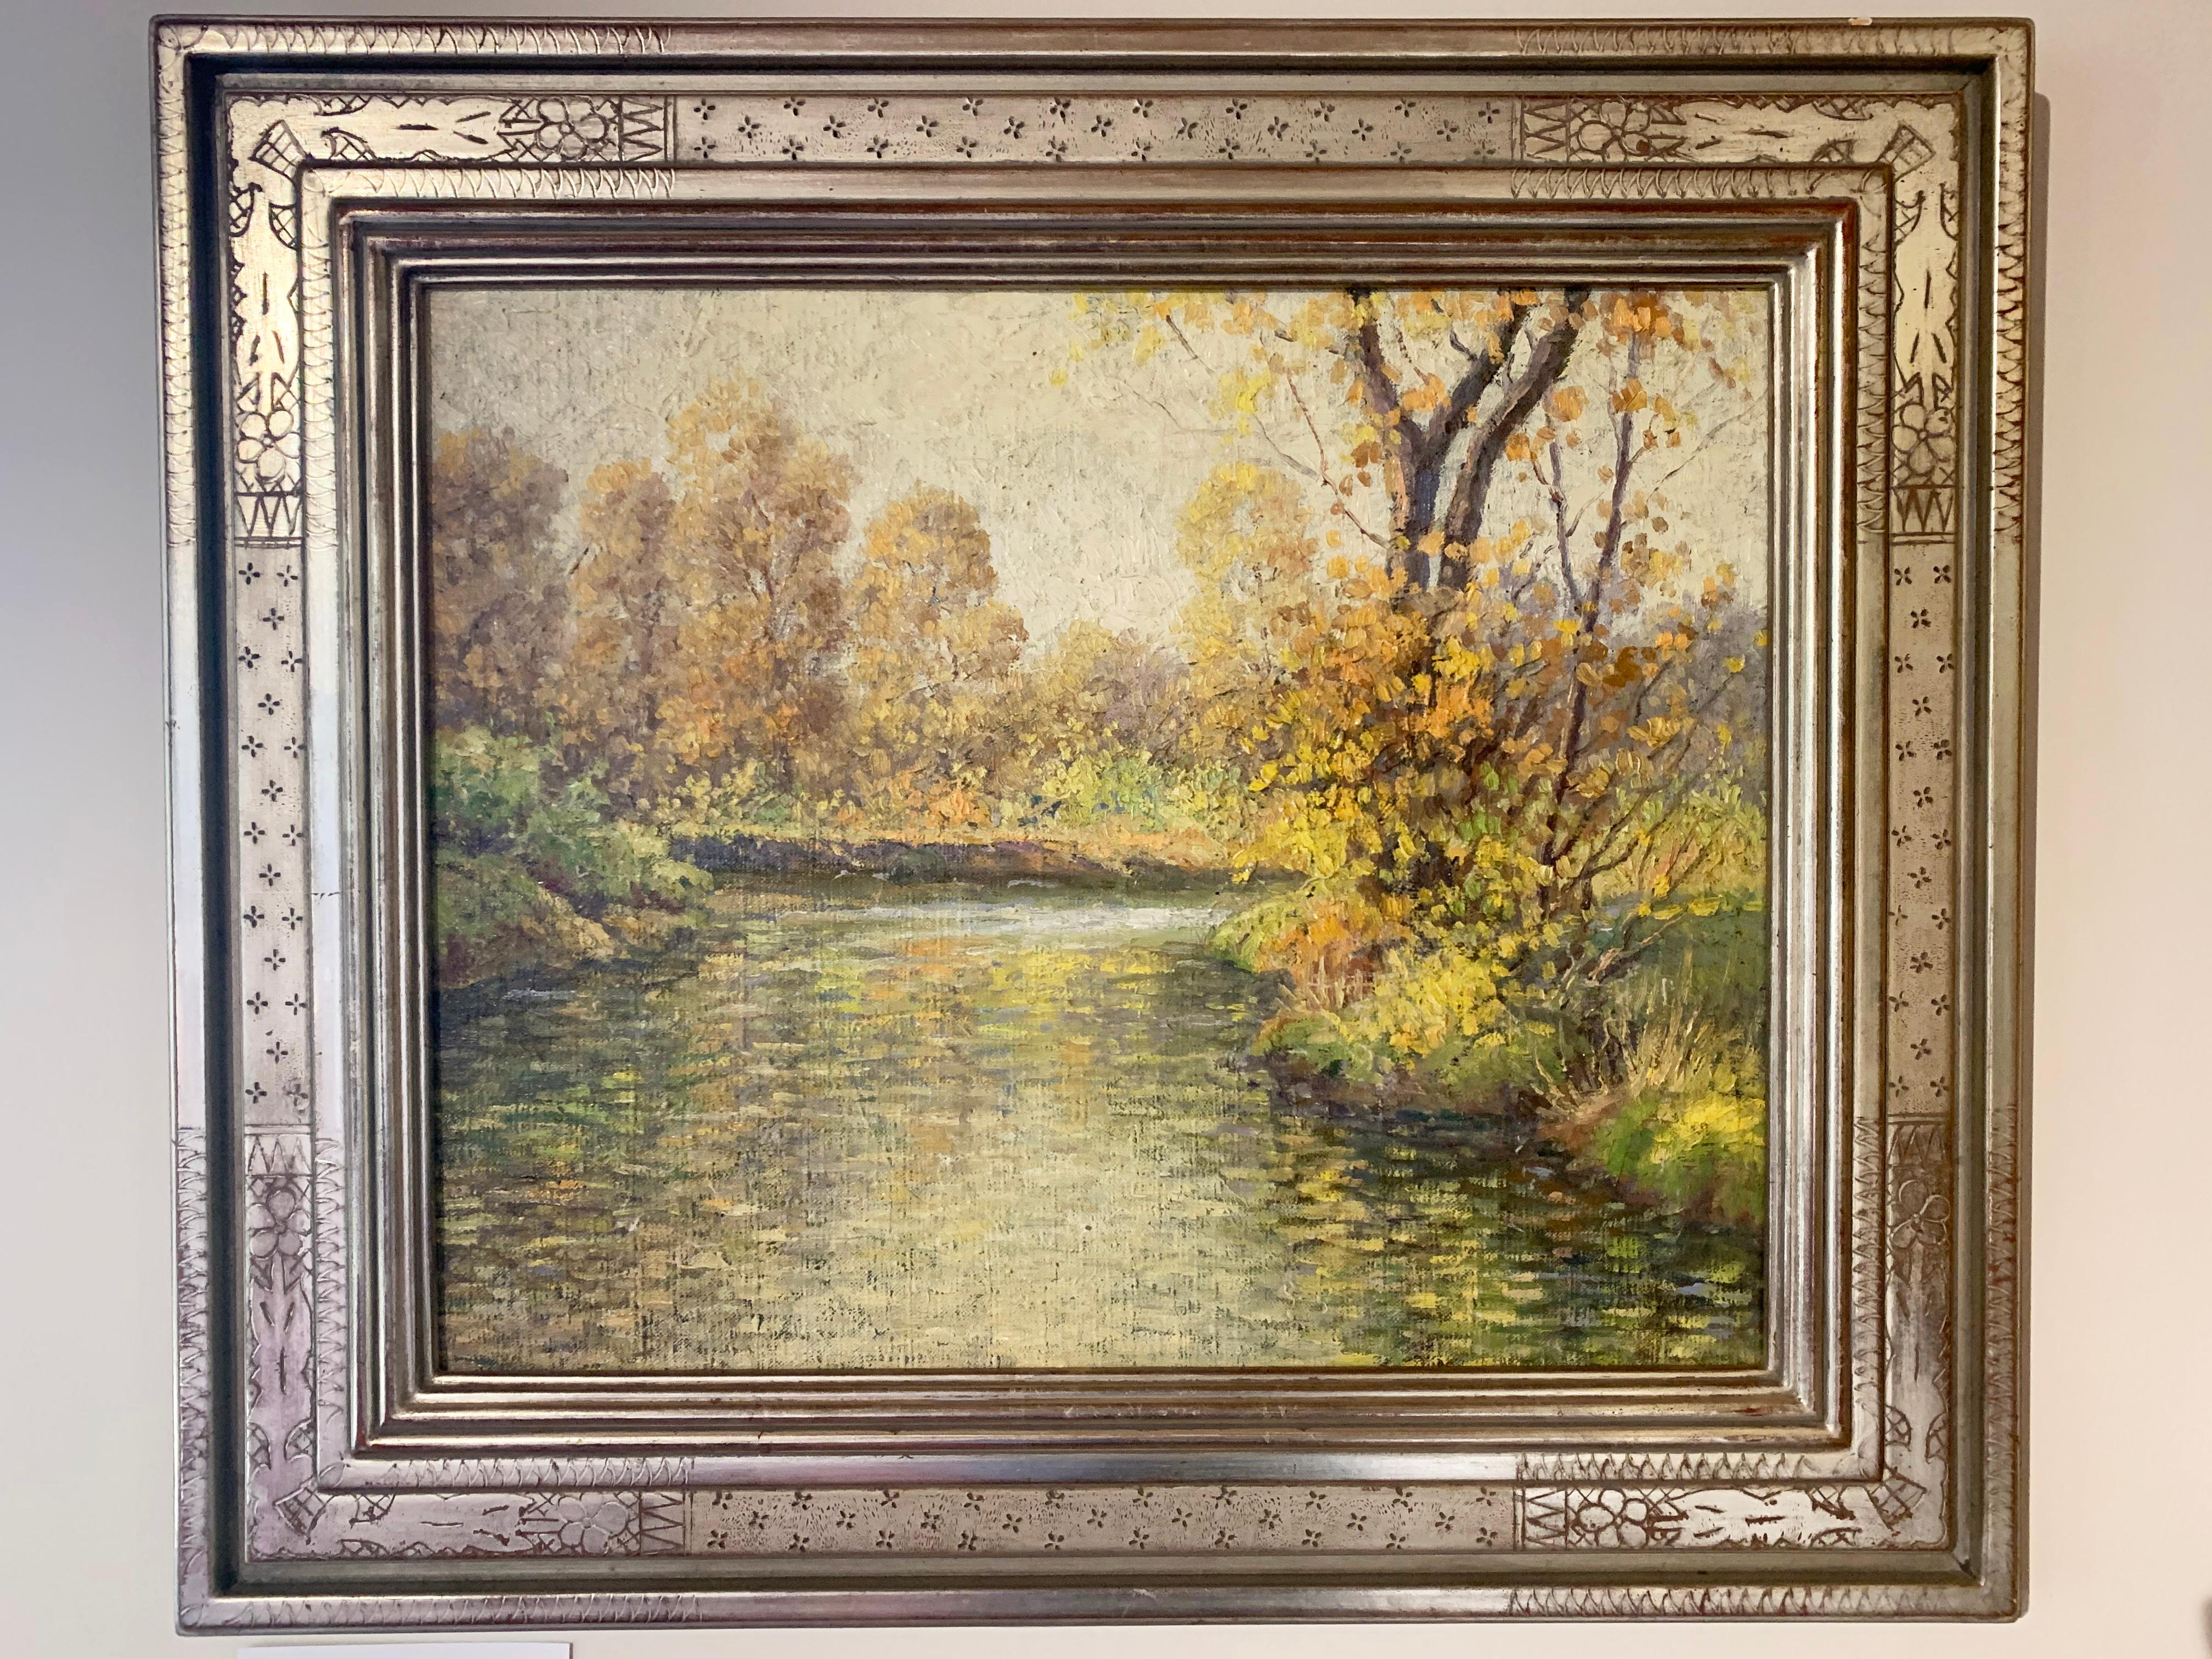 Reflections, American Impressionist Landscape by Stream, Oil on Canvas